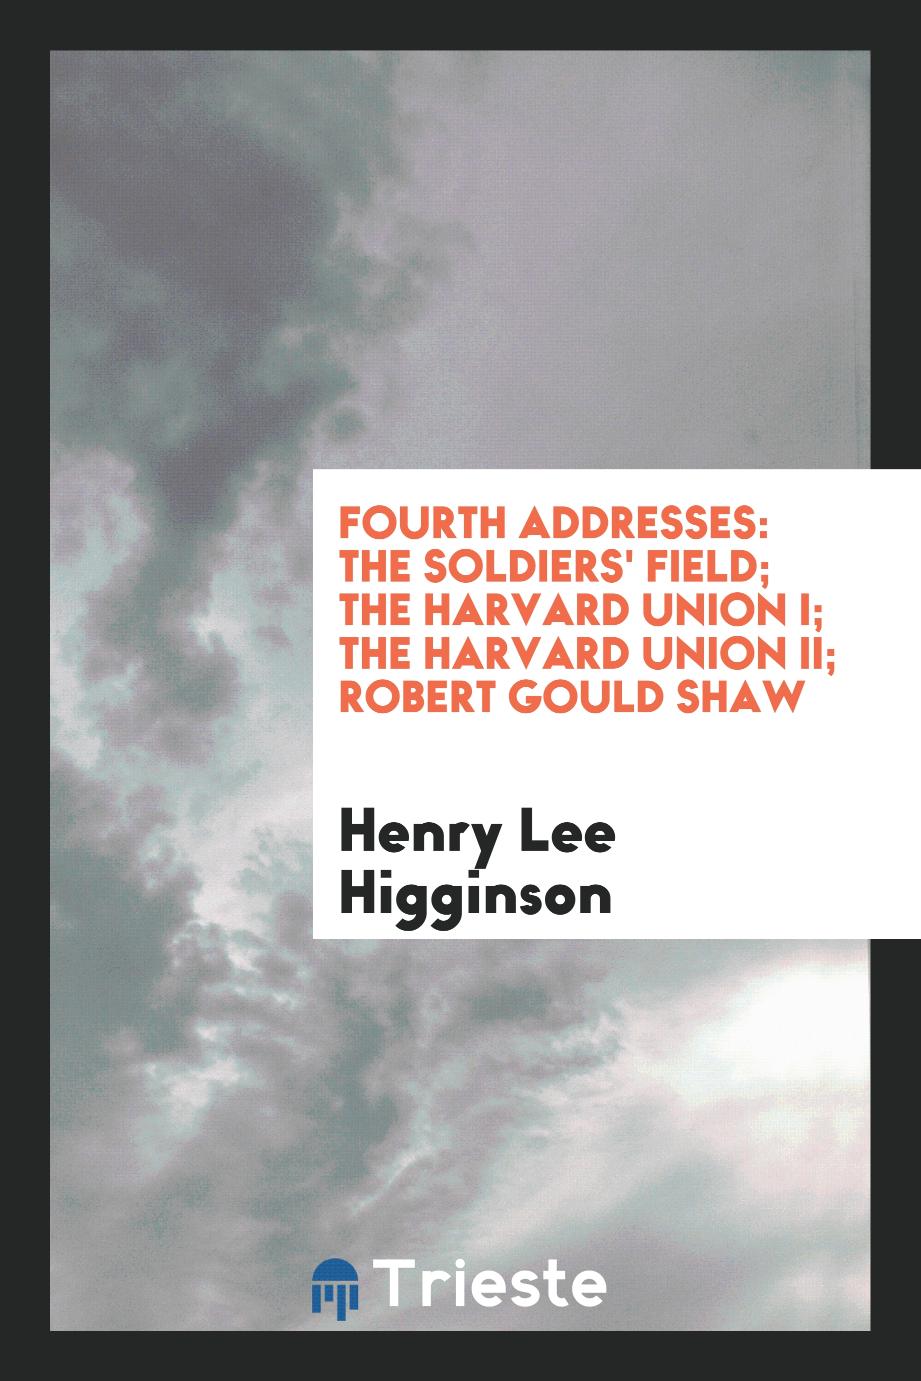 Fourth Addresses: The Soldiers' Field; The Harvard Union I; The Harvard Union II; Robert Gould Shaw